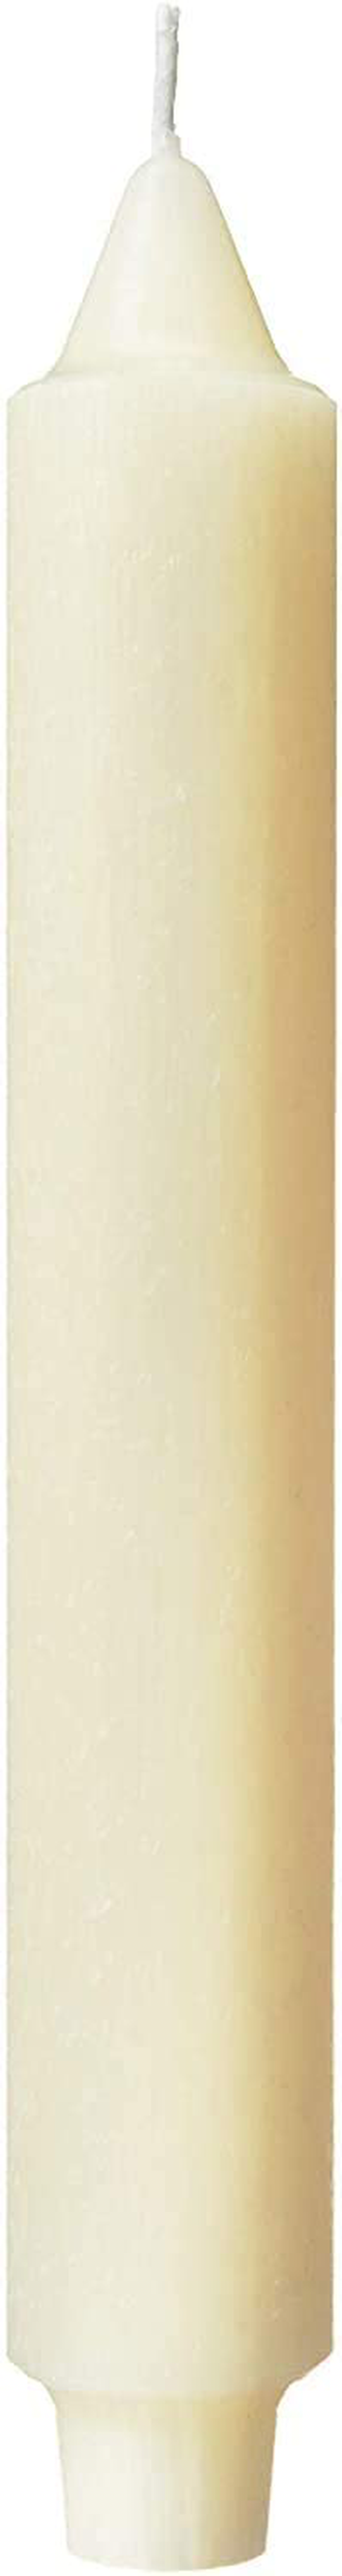 Root 9-Inch Unscented Timberline Collenette Candles, Ivory, Box of 4 Home & Garden > Decor > Home Fragrances > Candles Root Candles   